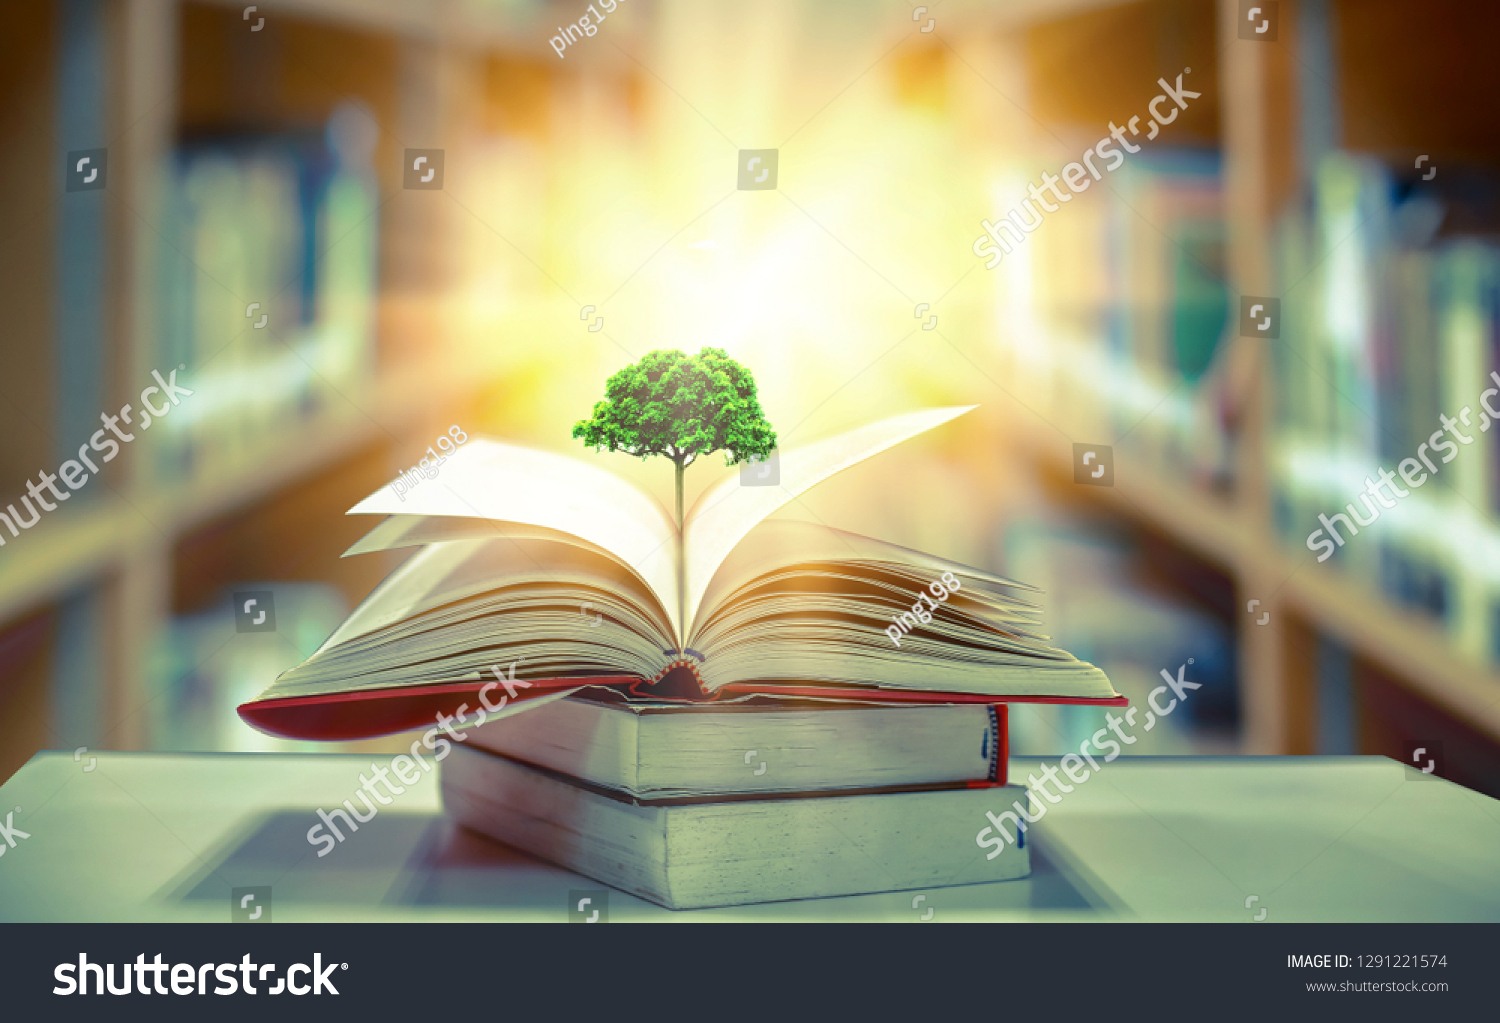 education concept with tree of knowledge planting on opening old big book in library with textbook, stack piles of text archive and aisle of bookshelves in school study class room  #1291221574